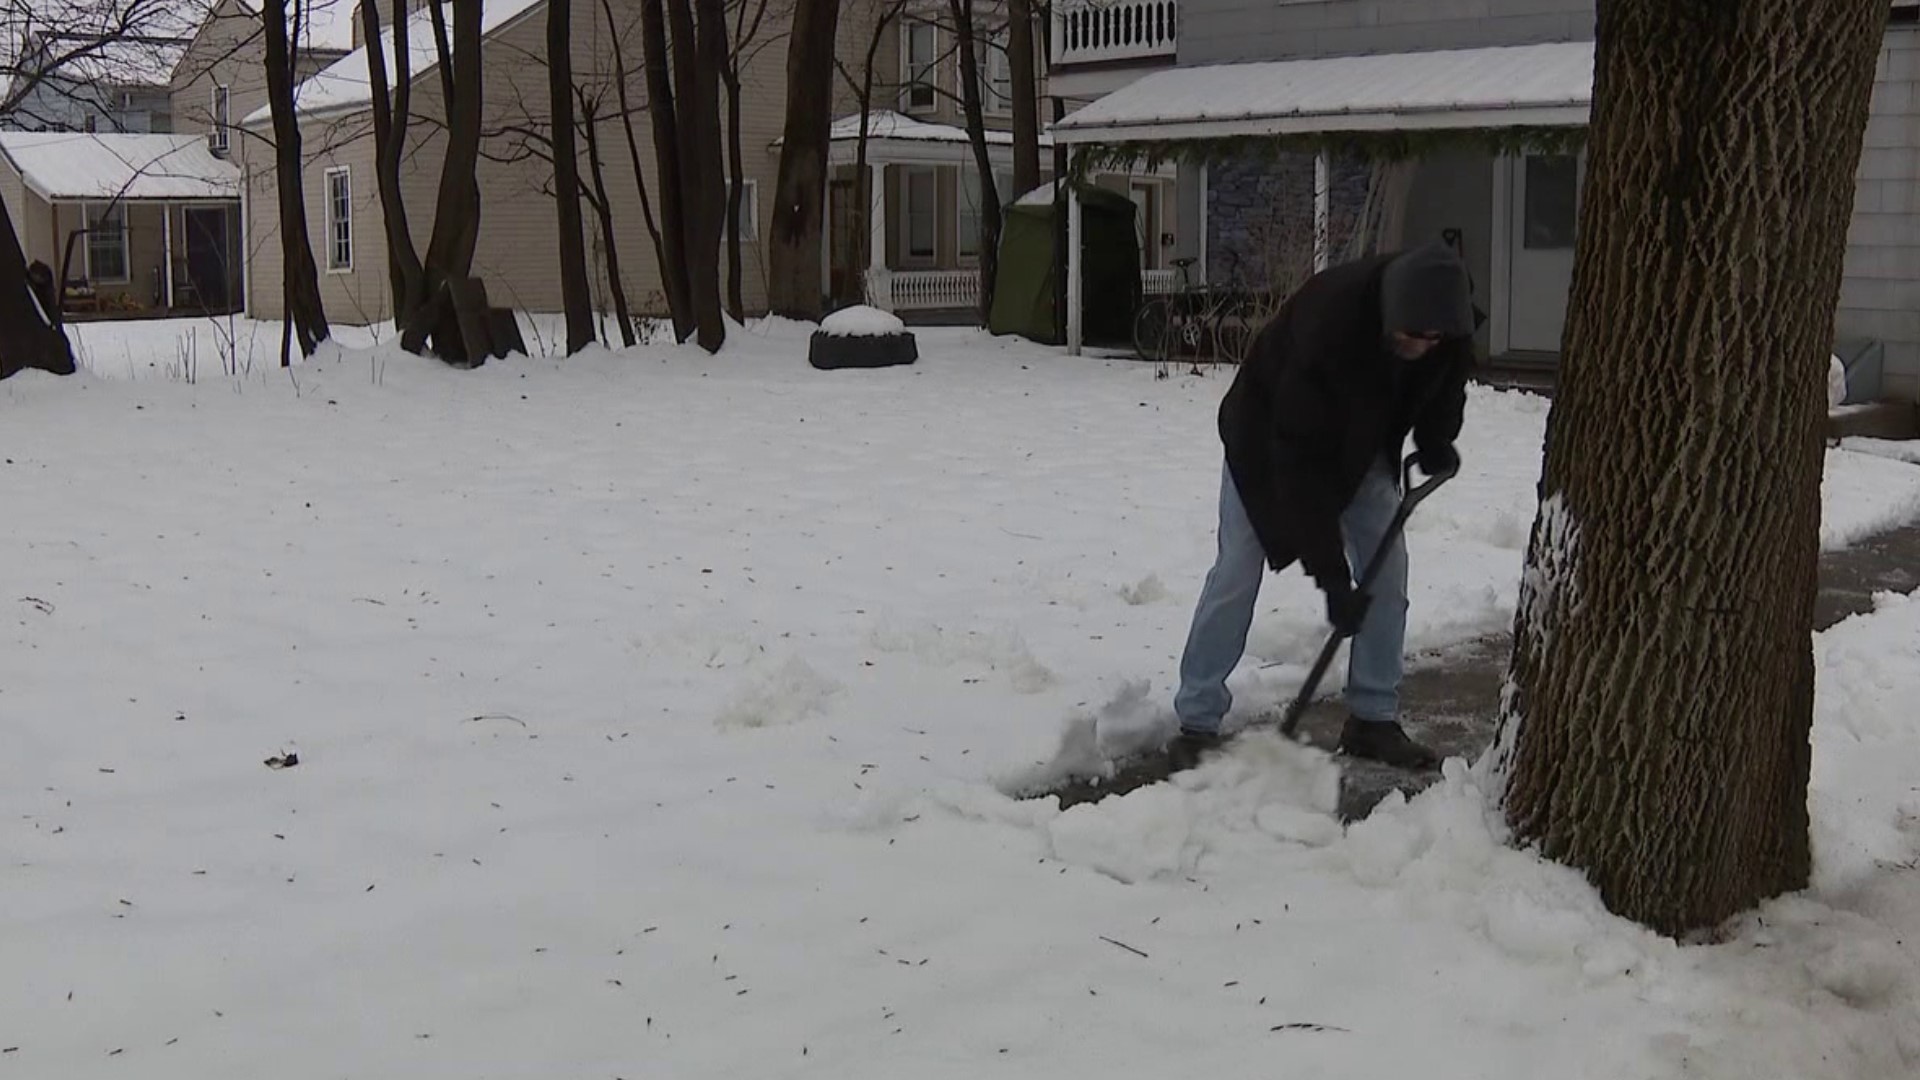 People have been out all morning cleaning up after the winter storm dumped snow around the region.